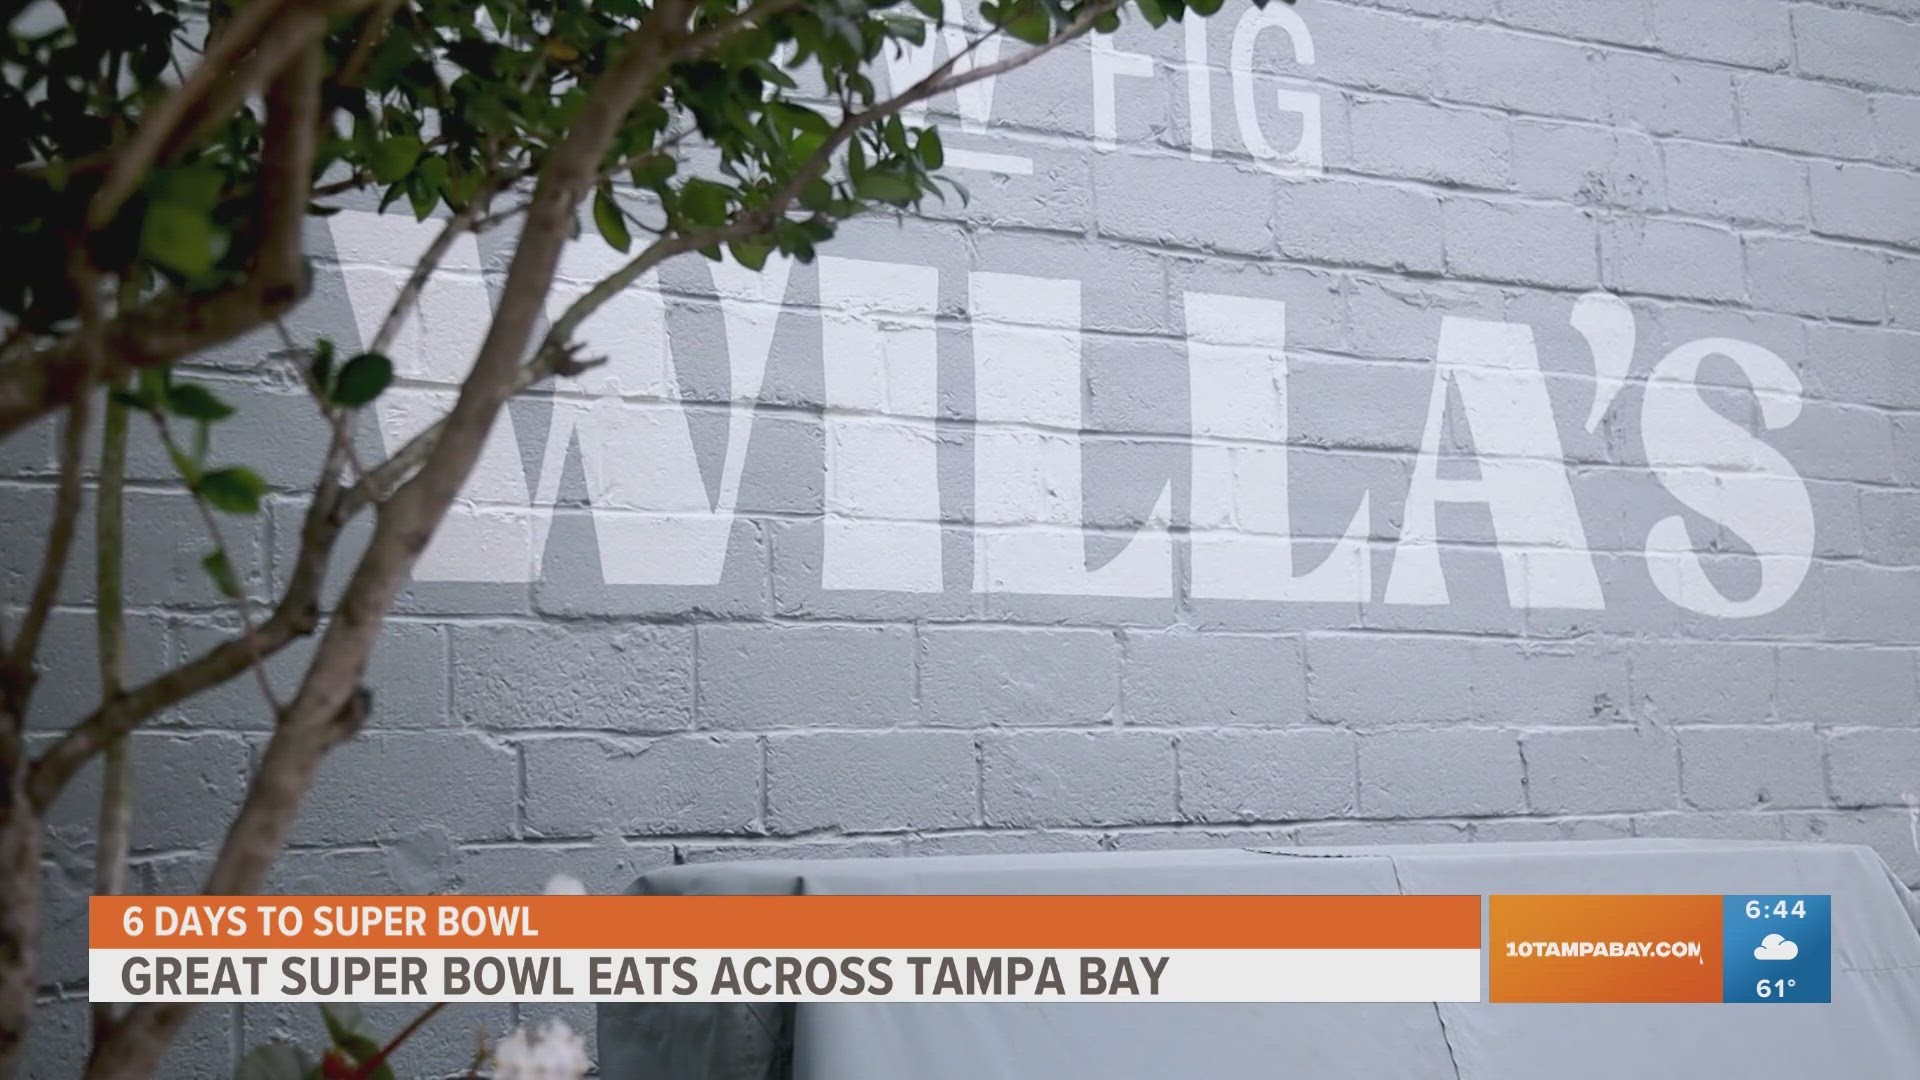 If you’re looking for some help with your Super Bowl spread Willa’s in Tampa is offering some game worthy options.